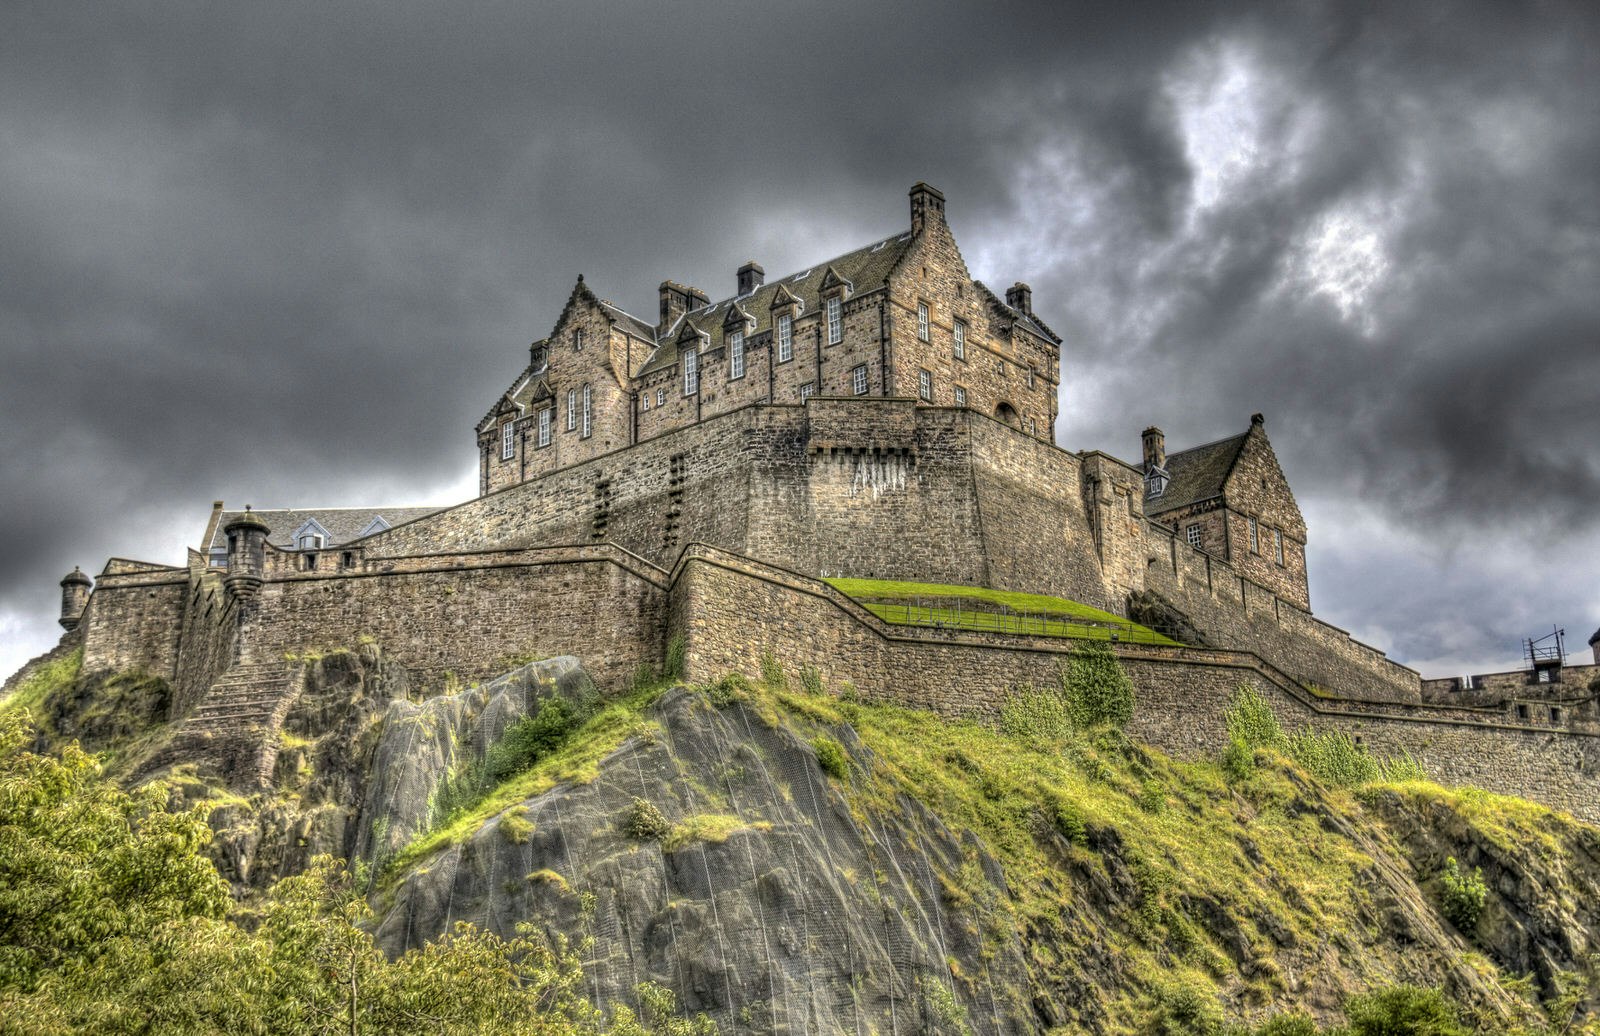 Low-angle view of Edinburgh Castle on Castle Rock with dark clouds.